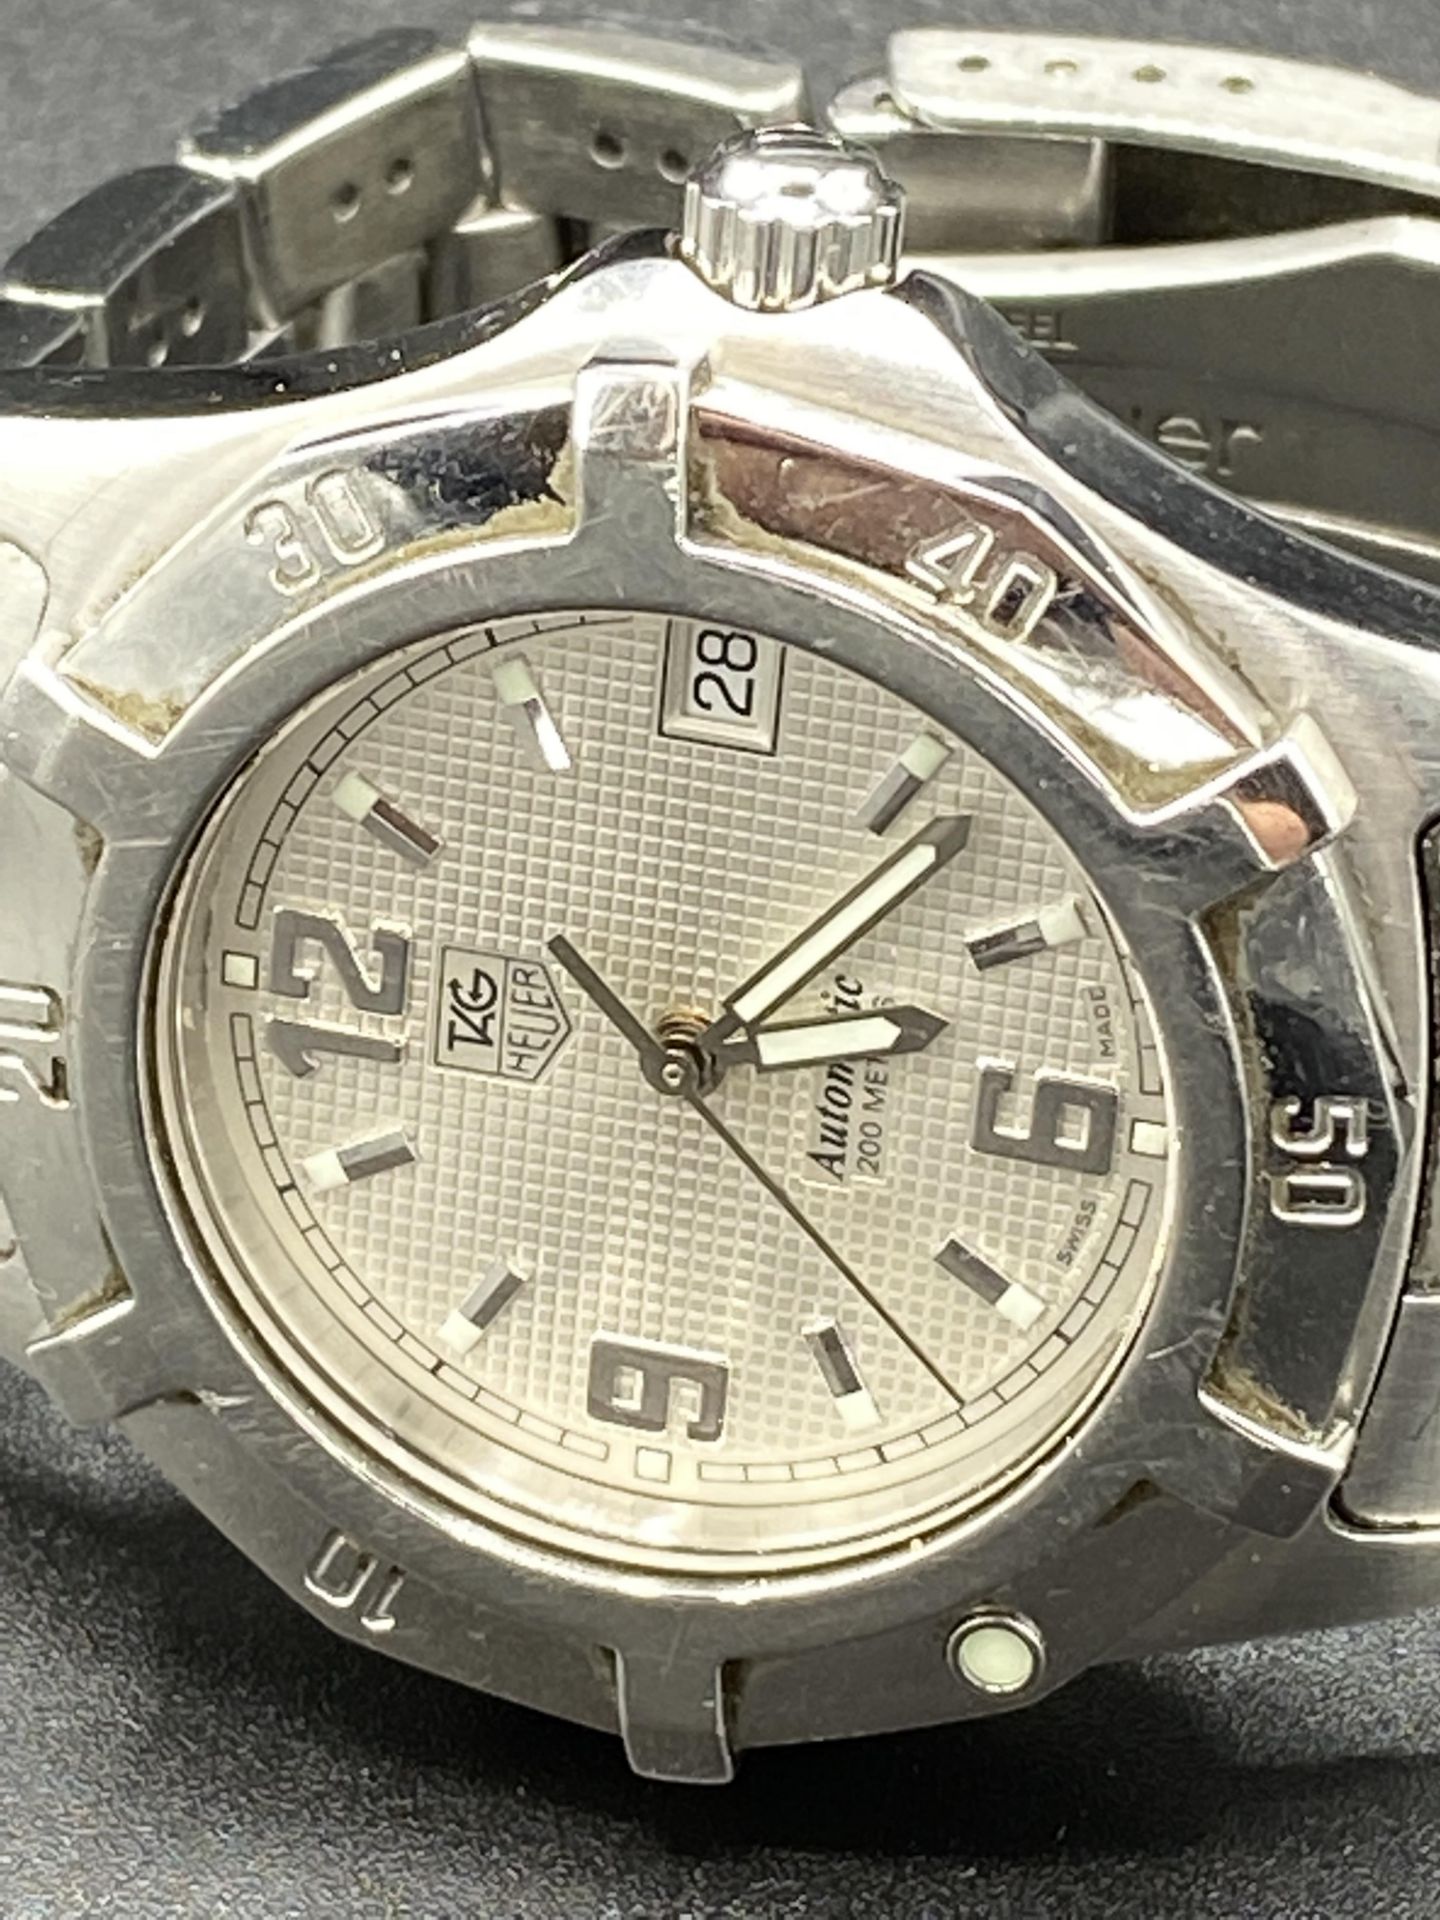 Tag Heuer stainless steel wrist watch - Image 2 of 7